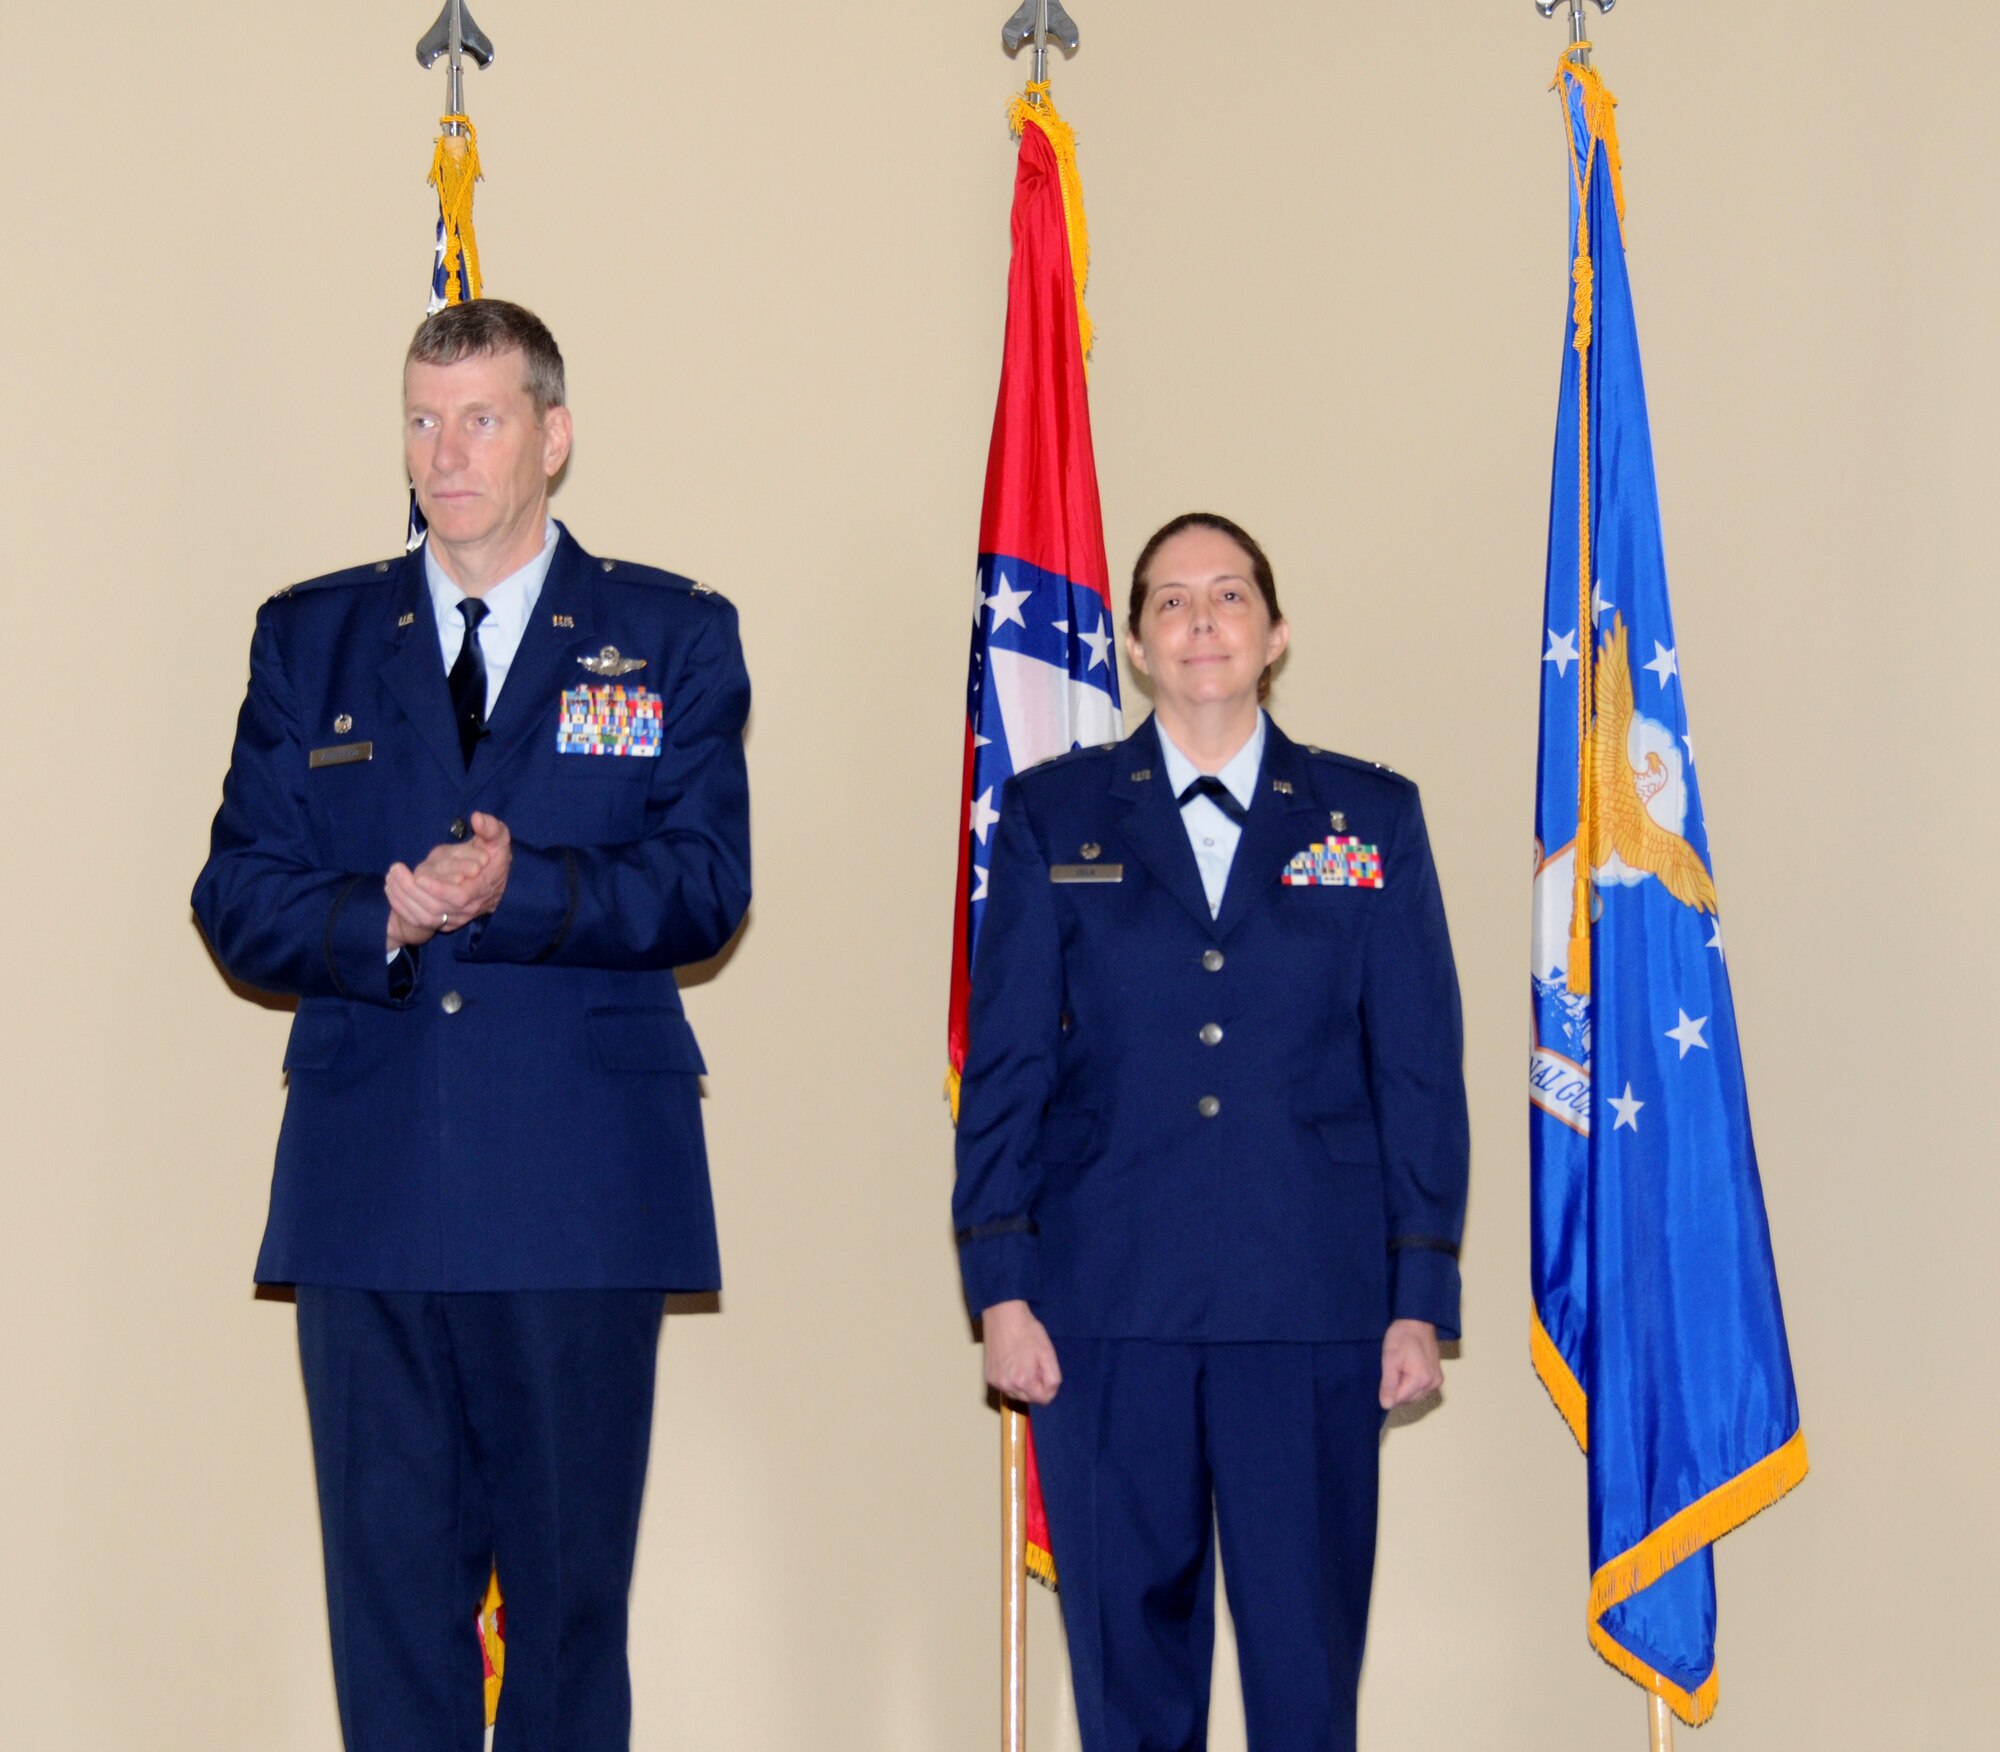 Col. Mark Anderson, 188th Fighter Wing commander, left, applauds during the promotion ceremony for Col. Misty Zelk, 188th Medical Group commander, at Ebbing Air National Guard Base, Ark., March 2, 2014. Zelk is the first female in the 188th Fighter Wing's 60-year history to be promoted to 0-6. (U.S. Air National Guard photo by Tech. Sgt. Josh Lewis/released) 